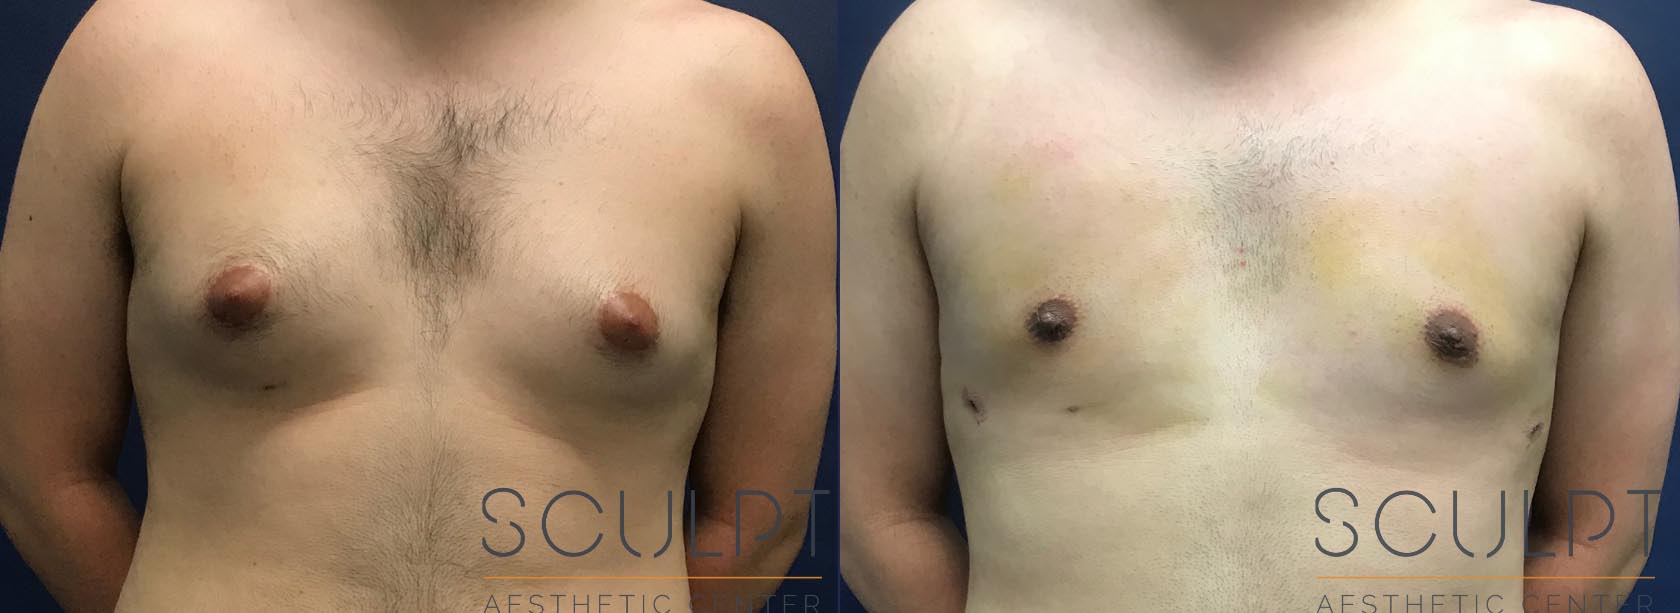 Gynecomastia Excision with Chest SCULPTing Before and After Photo by Sculpt Aesthetic Center in Frisco, TX